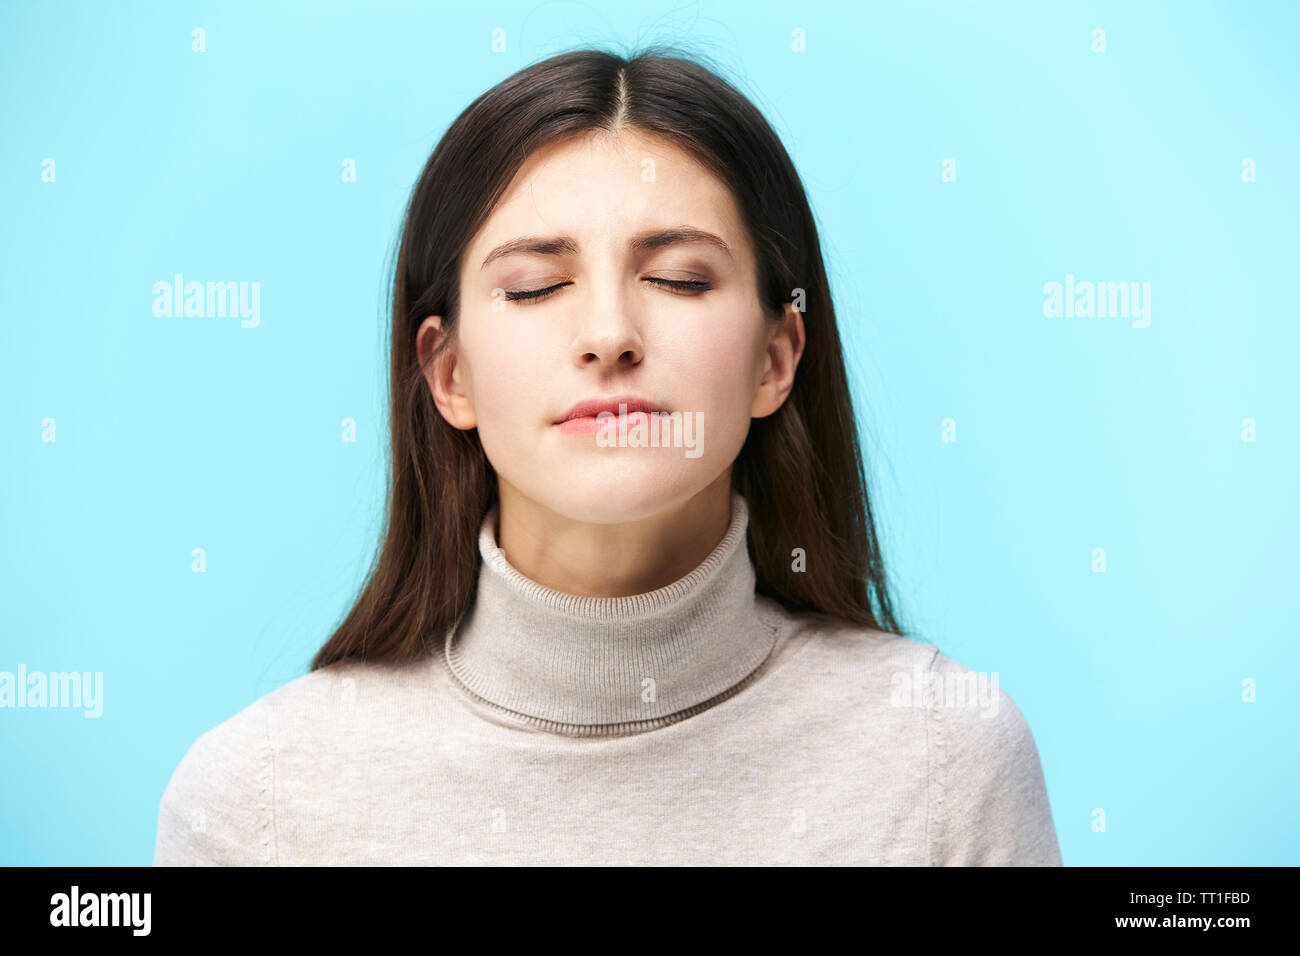 portrait of a young caucasian woman, eyes closed, isolated on blue background Stock Photo